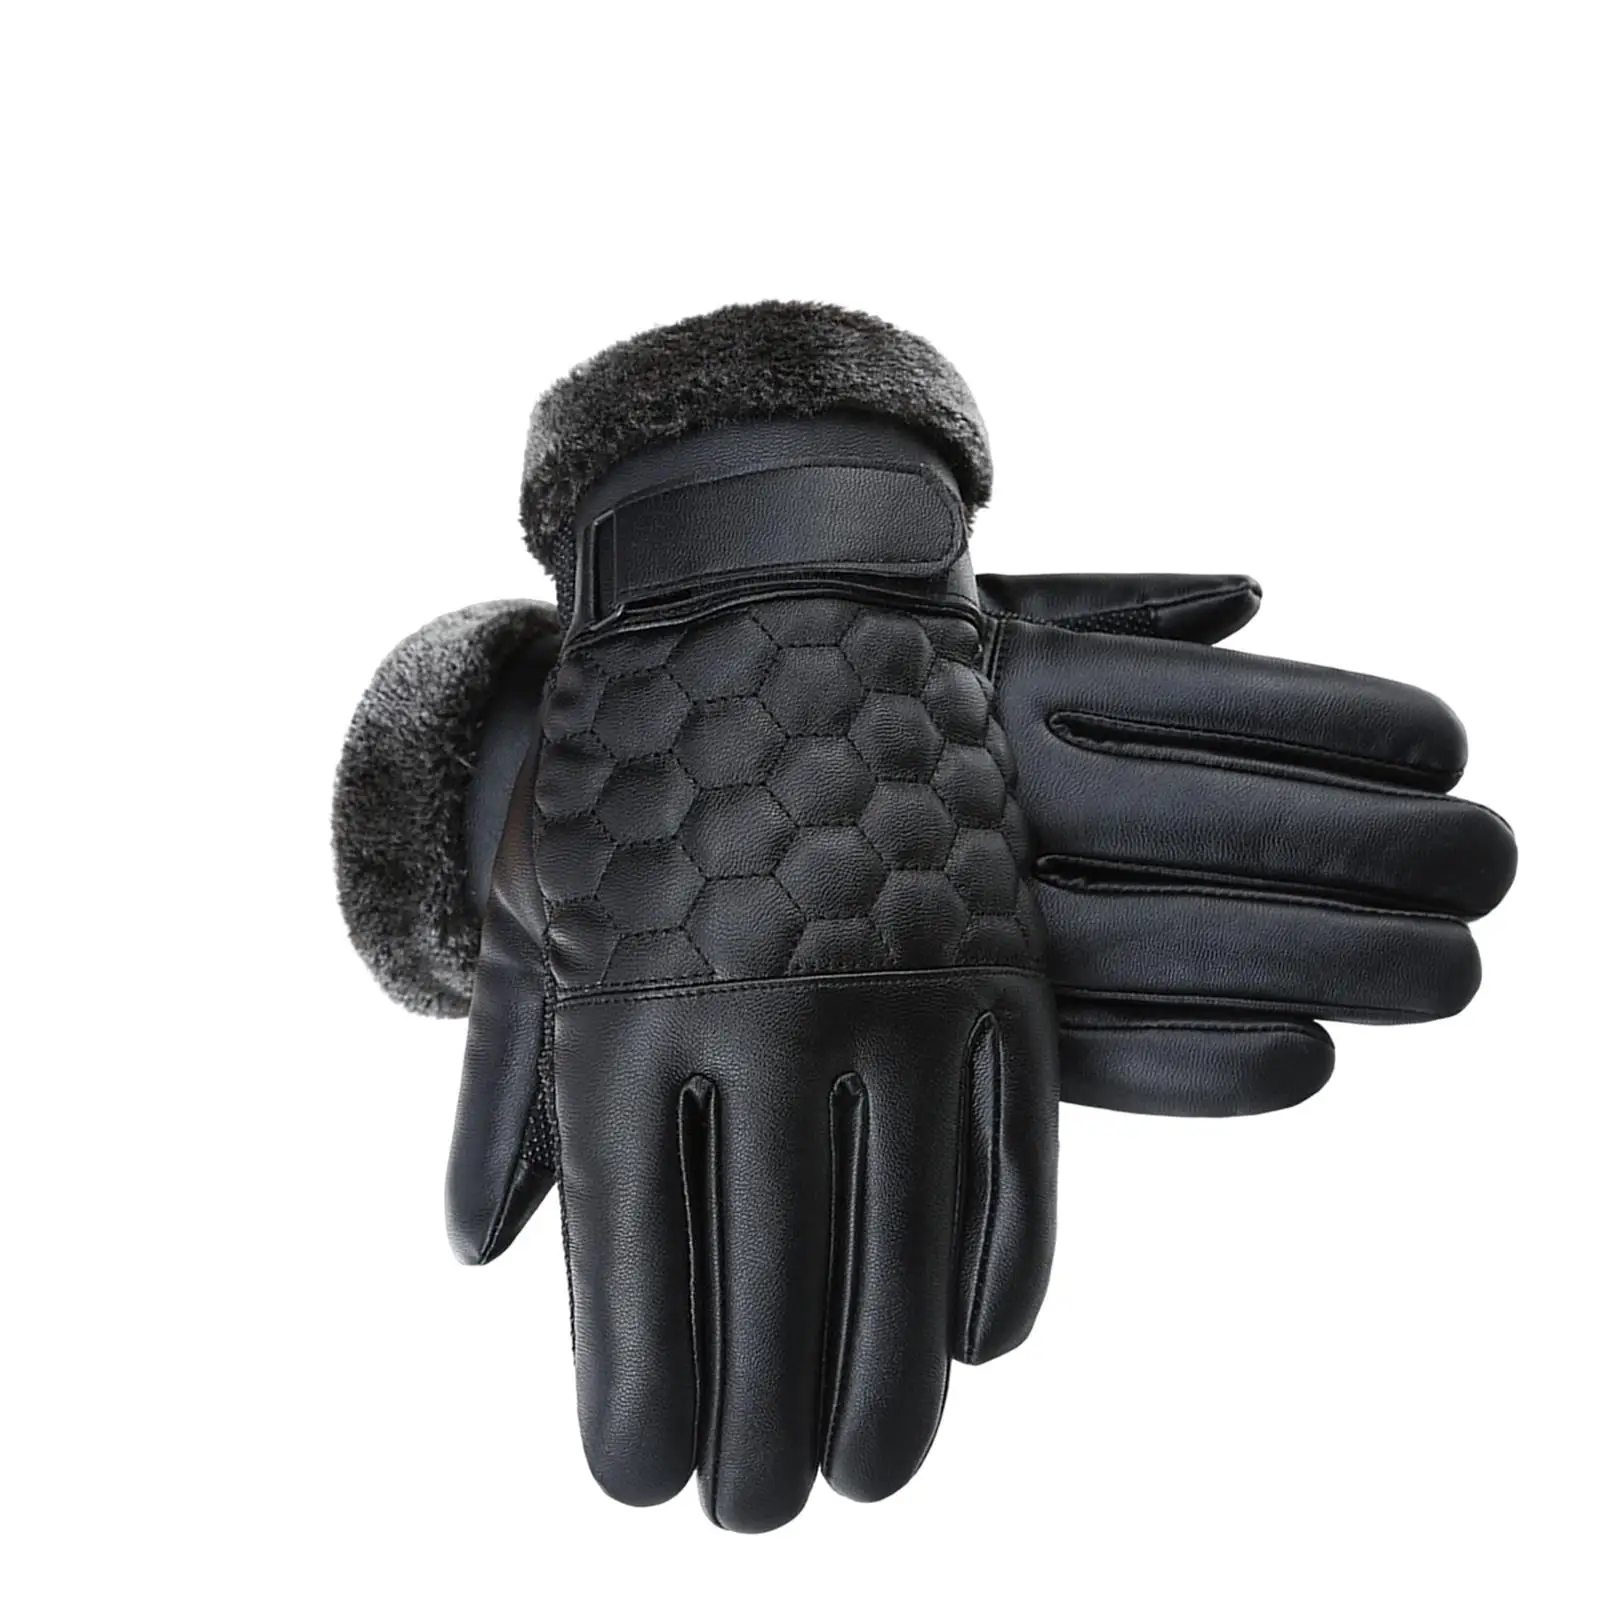 Winter Gloves Touchscreen Comfortable Durable Weather Resistant Thermal Gloves for Driving Riding Typing Outdoor Sports Racing